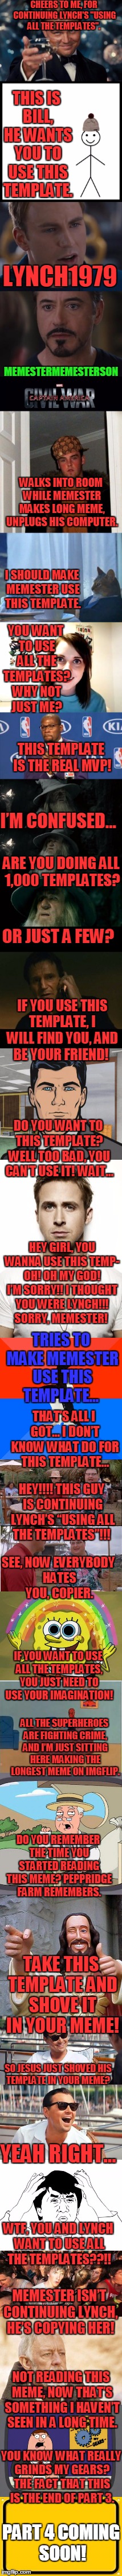 Well That Escalated Quickly Part 3 |  CHEERS TO ME, FOR CONTINUING LYNCH'S "USING ALL THE TEMPLATES". THIS IS BILL, HE WANTS YOU TO USE THIS TEMPLATE. LYNCH1979; MEMESTERMEMESTERSON; WALKS INTO ROOM WHILE MEMESTER MAKES LONG MEME, UNPLUGS HIS COMPUTER. I SHOULD MAKE MEMESTER USE THIS TEMPLATE. YOU WANT TO USE ALL THE TEMPLATES? WHY NOT JUST ME? THIS TEMPLATE IS THE REAL MVP! I’M CONFUSED…; ARE YOU DOING ALL 1,000 TEMPLATES? OR JUST A FEW? IF YOU USE THIS TEMPLATE, I WILL FIND YOU, AND BE YOUR FRIEND! DO YOU WANT TO THIS TEMPLATE? WELL TOO BAD, YOU CAN’T USE IT! WAIT…; HEY GIRL, YOU WANNA USE THIS TEMP- OH! OH MY GOD! I’M SORRY!! I THOUGHT YOU WERE LYNCH!!! SORRY, MEMESTER! TRIES TO MAKE MEMESTER USE THIS TEMPLATE…; THAT’S ALL I GOT… I DON’T KNOW WHAT DO FOR THIS TEMPLATE…; HEY!!!! THIS GUY IS CONTINUING LYNCH’S “USING ALL THE TEMPLATES”!!! SEE, NOW EVERYBODY HATES YOU, COPIER. IF YOU WANT TO USE ALL THE TEMPLATES, YOU JUST NEED TO USE YOUR IMAGINATION! ALL THE SUPERHEROES ARE FIGHTING CRIME, AND I’M JUST SITTING HERE MAKING THE LONGEST MEME ON IMGFLIP. DO YOU REMEMBER THE TIME YOU STARTED READING THIS MEME? PEPPRIDGE FARM REMEMBERS. TAKE THIS TEMPLATE AND SHOVE IT IN YOUR MEME! SO JESUS JUST SHOVED HIS TEMPLATE IN YOUR MEME? YEAH RIGHT…; WTF, YOU AND LYNCH WANT TO USE ALL THE TEMPLATES??!! MEMESTER ISN’T CONTINUING LYNCH, HE’S COPYING HER! NOT READING THIS MEME, NOW THAT’S SOMETHING I HAVEN’T SEEN IN A LONG TIME. YOU KNOW WHAT REALLY GRINDS MY GEARS? THE FACT THAT THIS IS THE END OF PART 3. PART 4 COMING SOON! | image tagged in memes,leonardo dicaprio cheers,marvel civil war 1,scumbag steve,overly attached girlfriend,templates | made w/ Imgflip meme maker